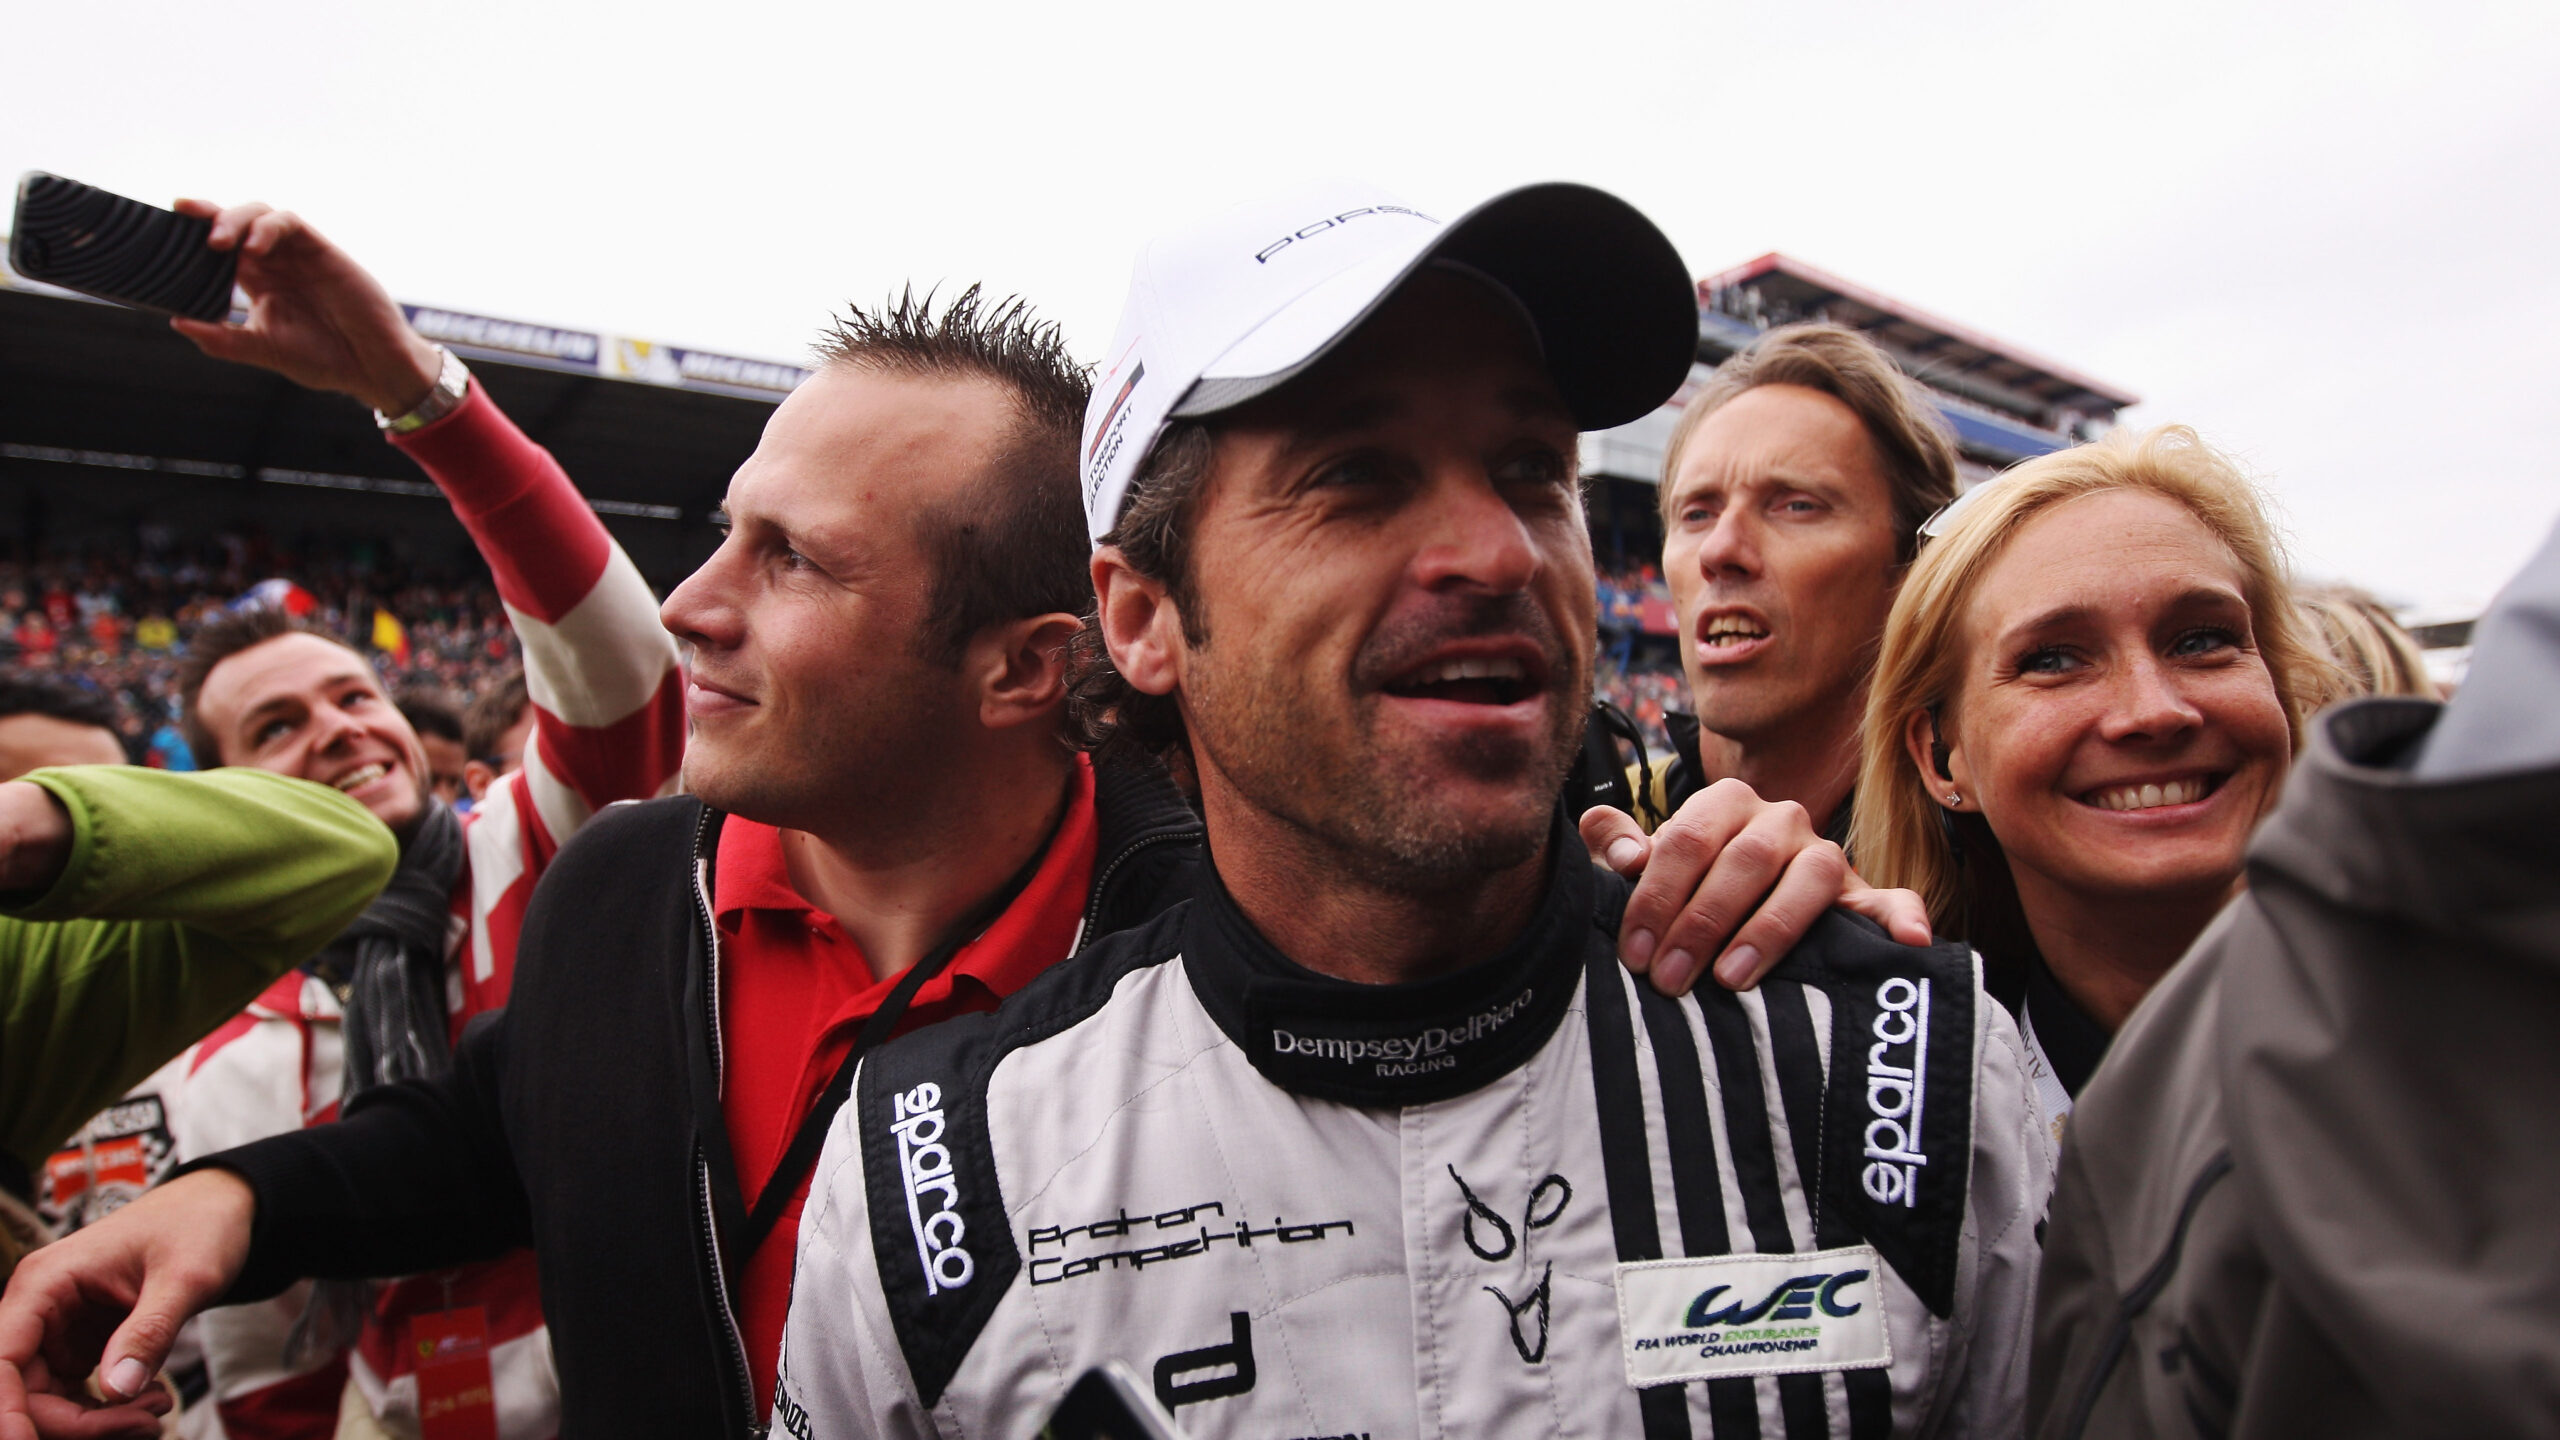 Actor Patrick Dempsey of the Dempsey Del Piero-Proton team is surrounded by media and well wishers on the grid before the Le Mans 24 Hour race at the Circuit de la Sarthe on June 22, 2013 in Le Mans, France.